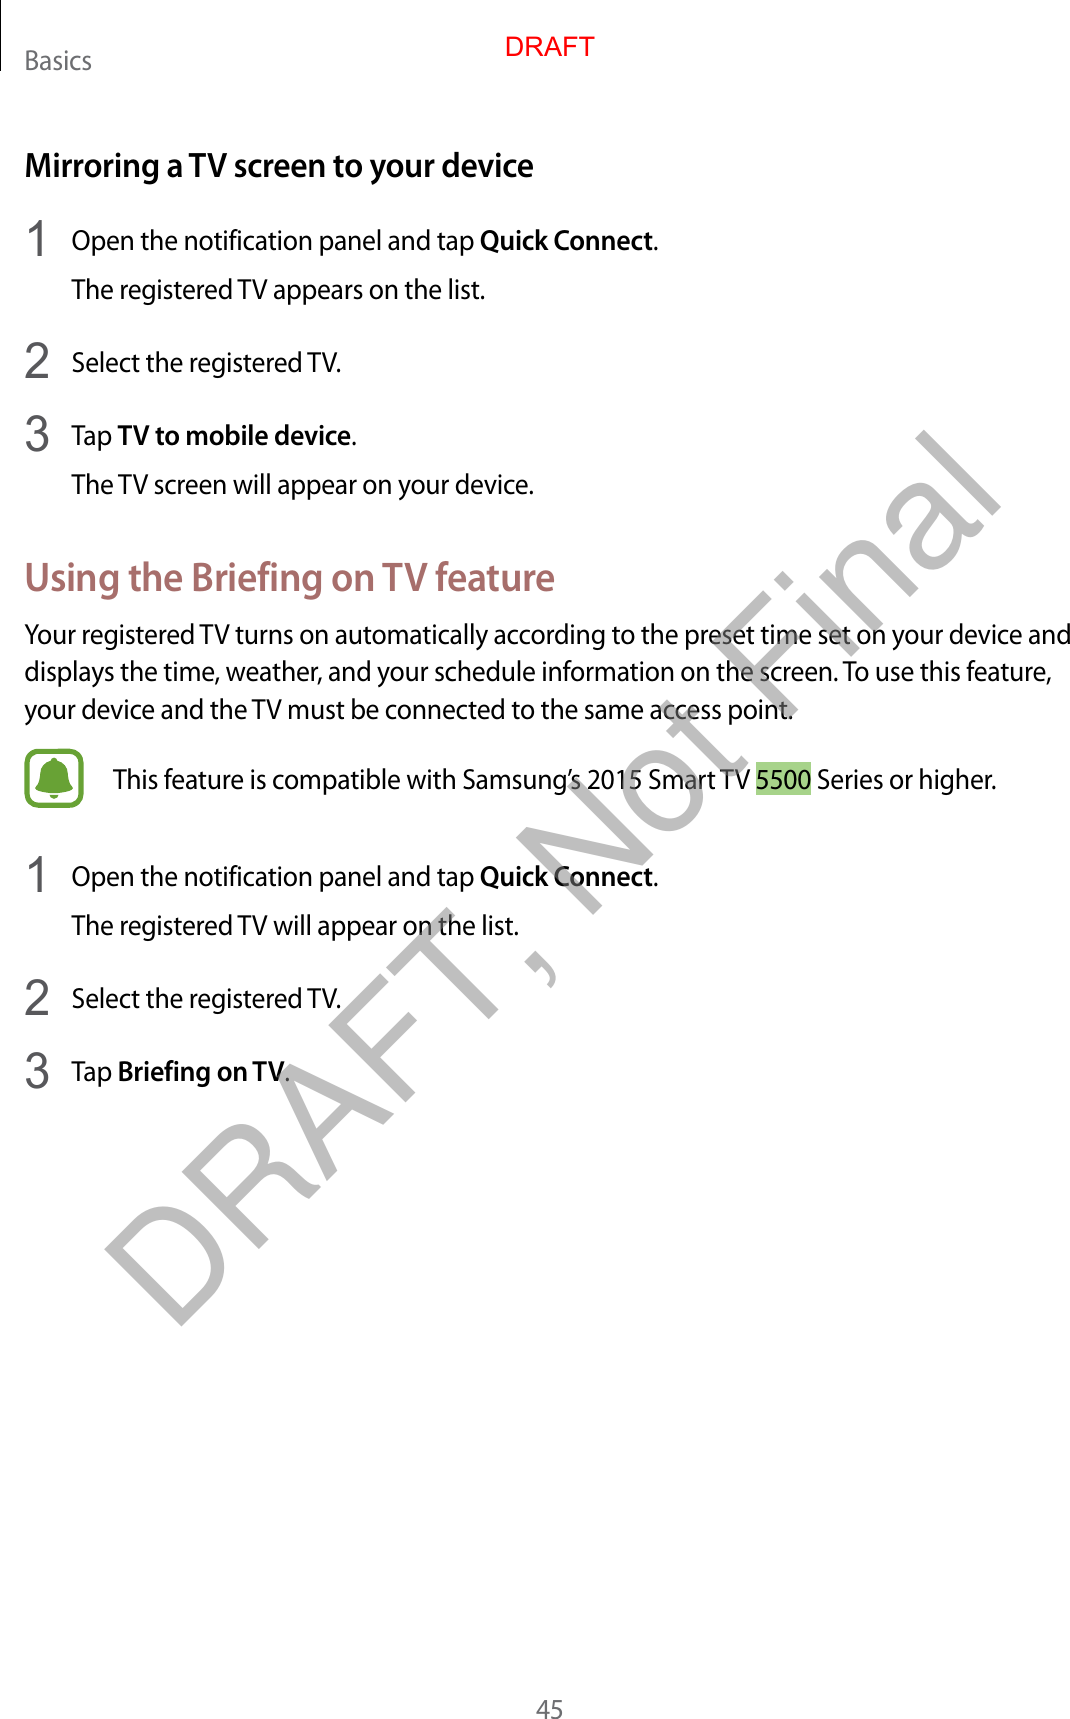 Basics45Mirroring a TV screen to your device1  Open the notification panel and tap Quick Connect.The registered TV appears on the list.2  Select the registered TV.3  Tap TV to mobile device.The TV screen will appear on your device.Using the Briefing on TV featureYour registered TV turns on automatically according to the preset time set on your device and displays the time, weather, and your schedule information on the screen. To use this feature, your device and the TV must be connected to the same access point.This feature is compatible with Samsung’s 2015 Smart TV 5500 Series or higher.1  Open the notification panel and tap Quick Connect.The registered TV will appear on the list.2  Select the registered TV.3  Tap Briefing on TV.DRAFTDRAFT, Not Final